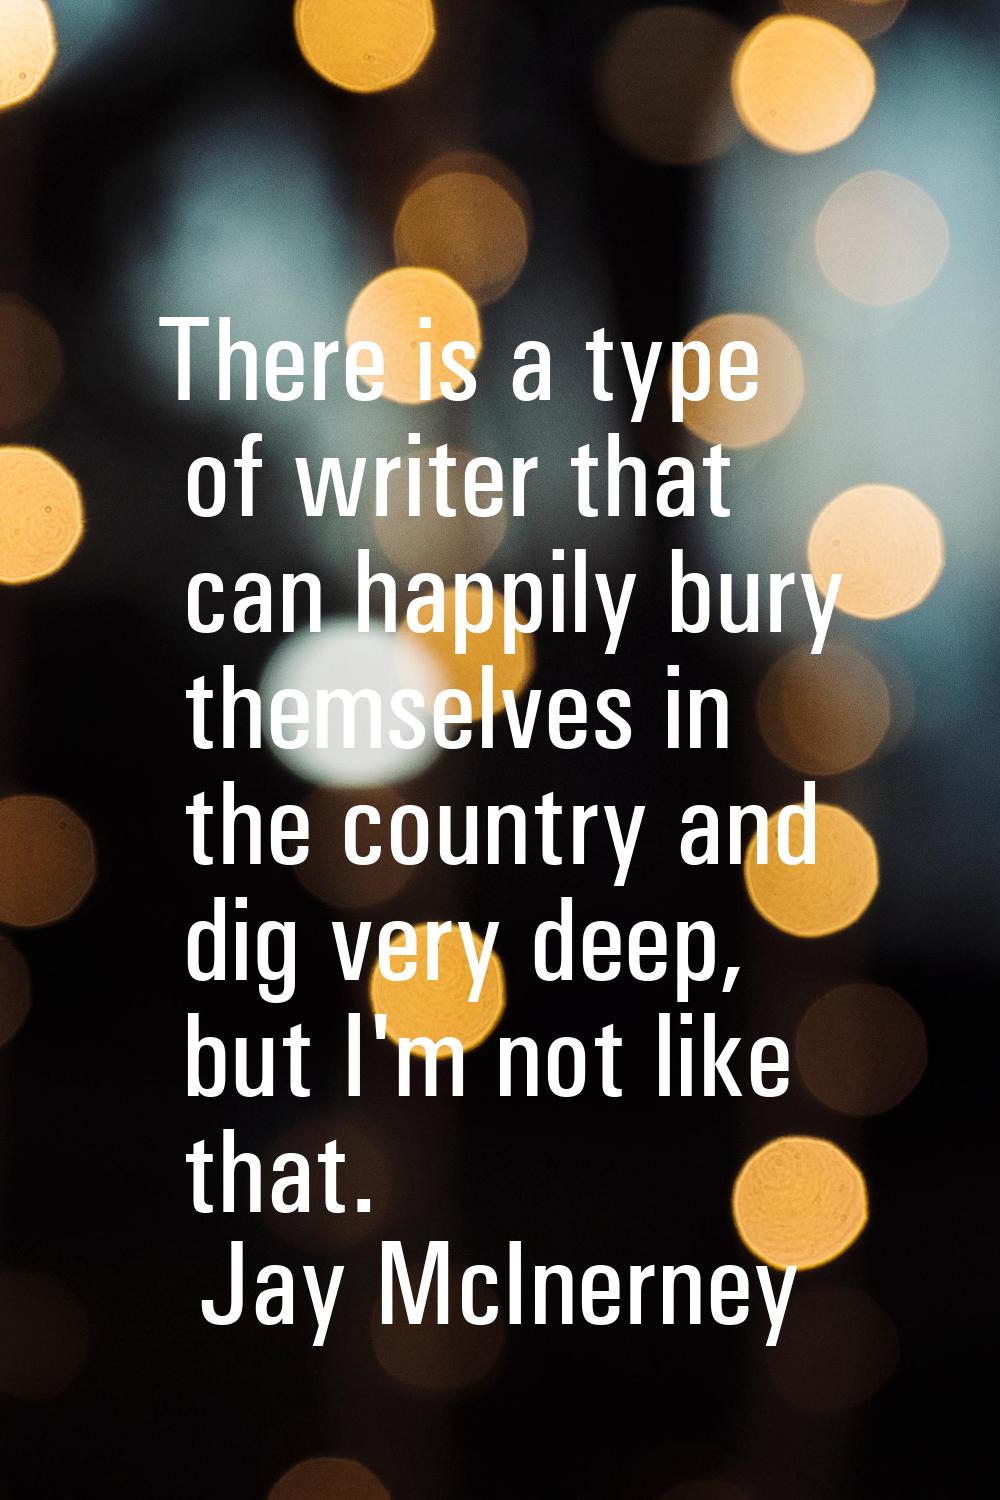 There is a type of writer that can happily bury themselves in the country and dig very deep, but I'